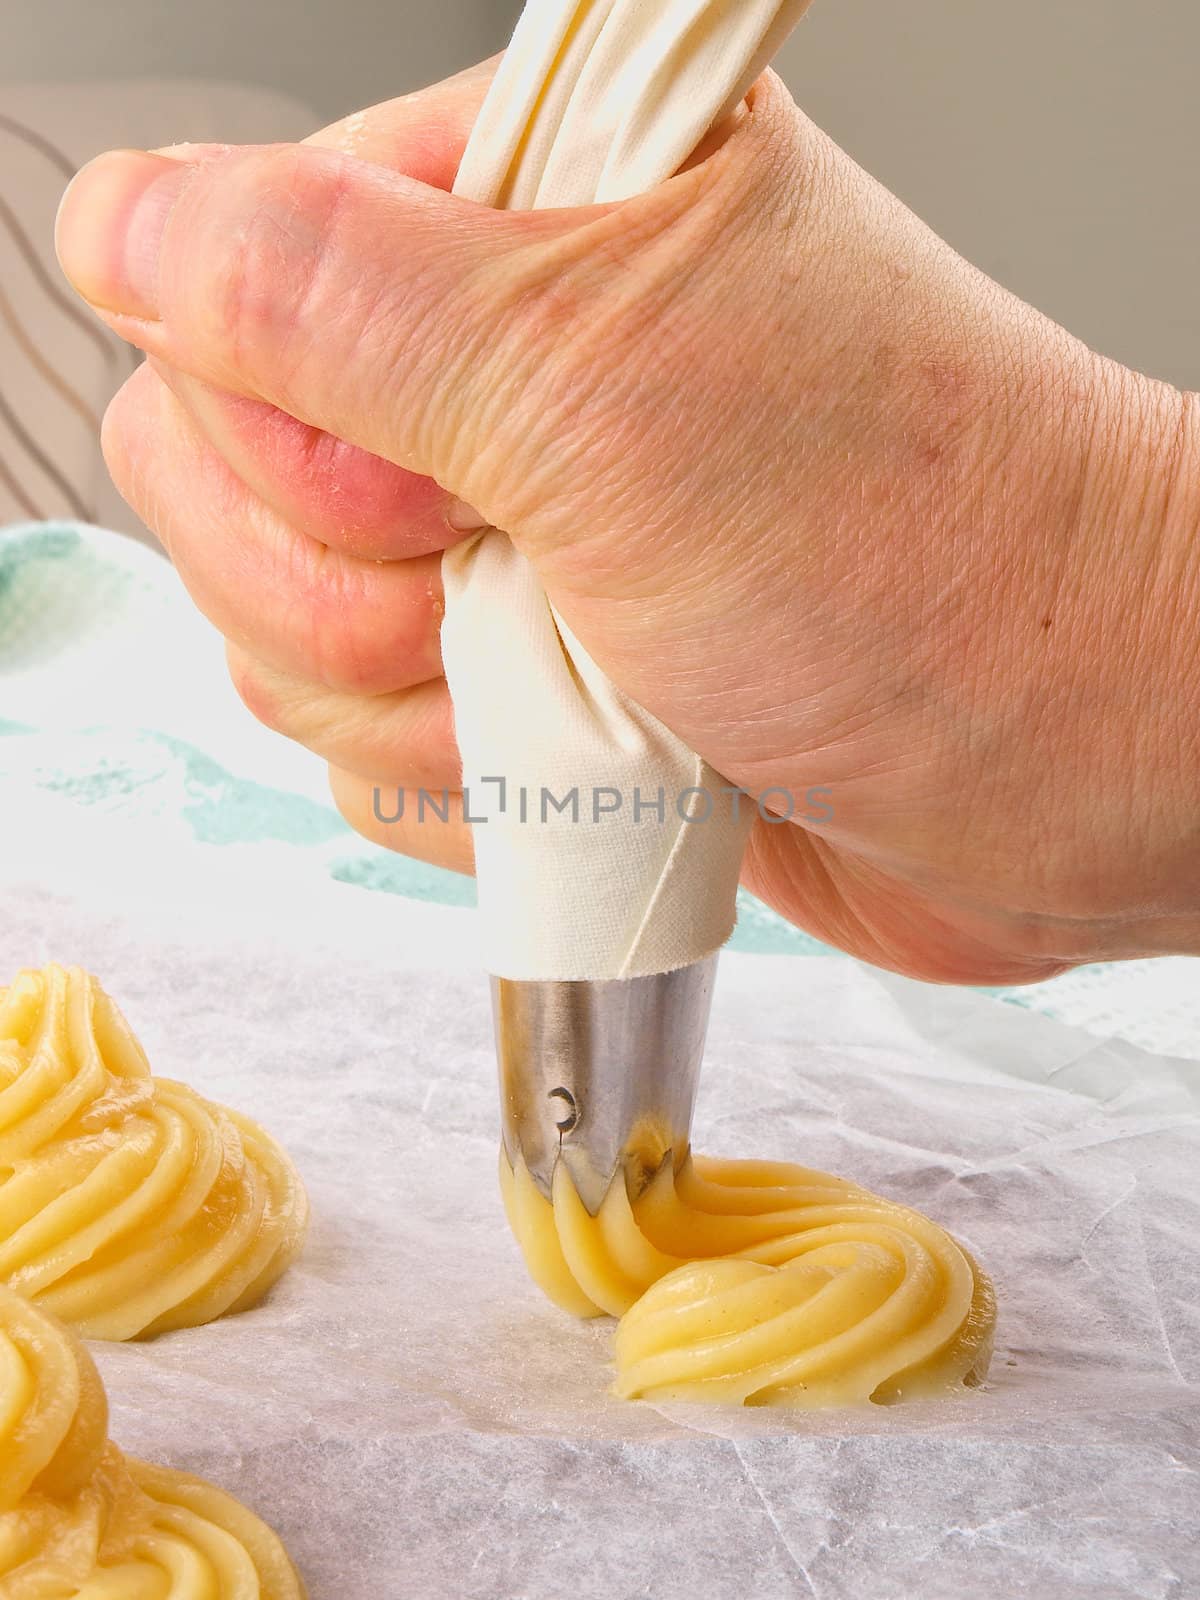 Baker making Choux pastry dough